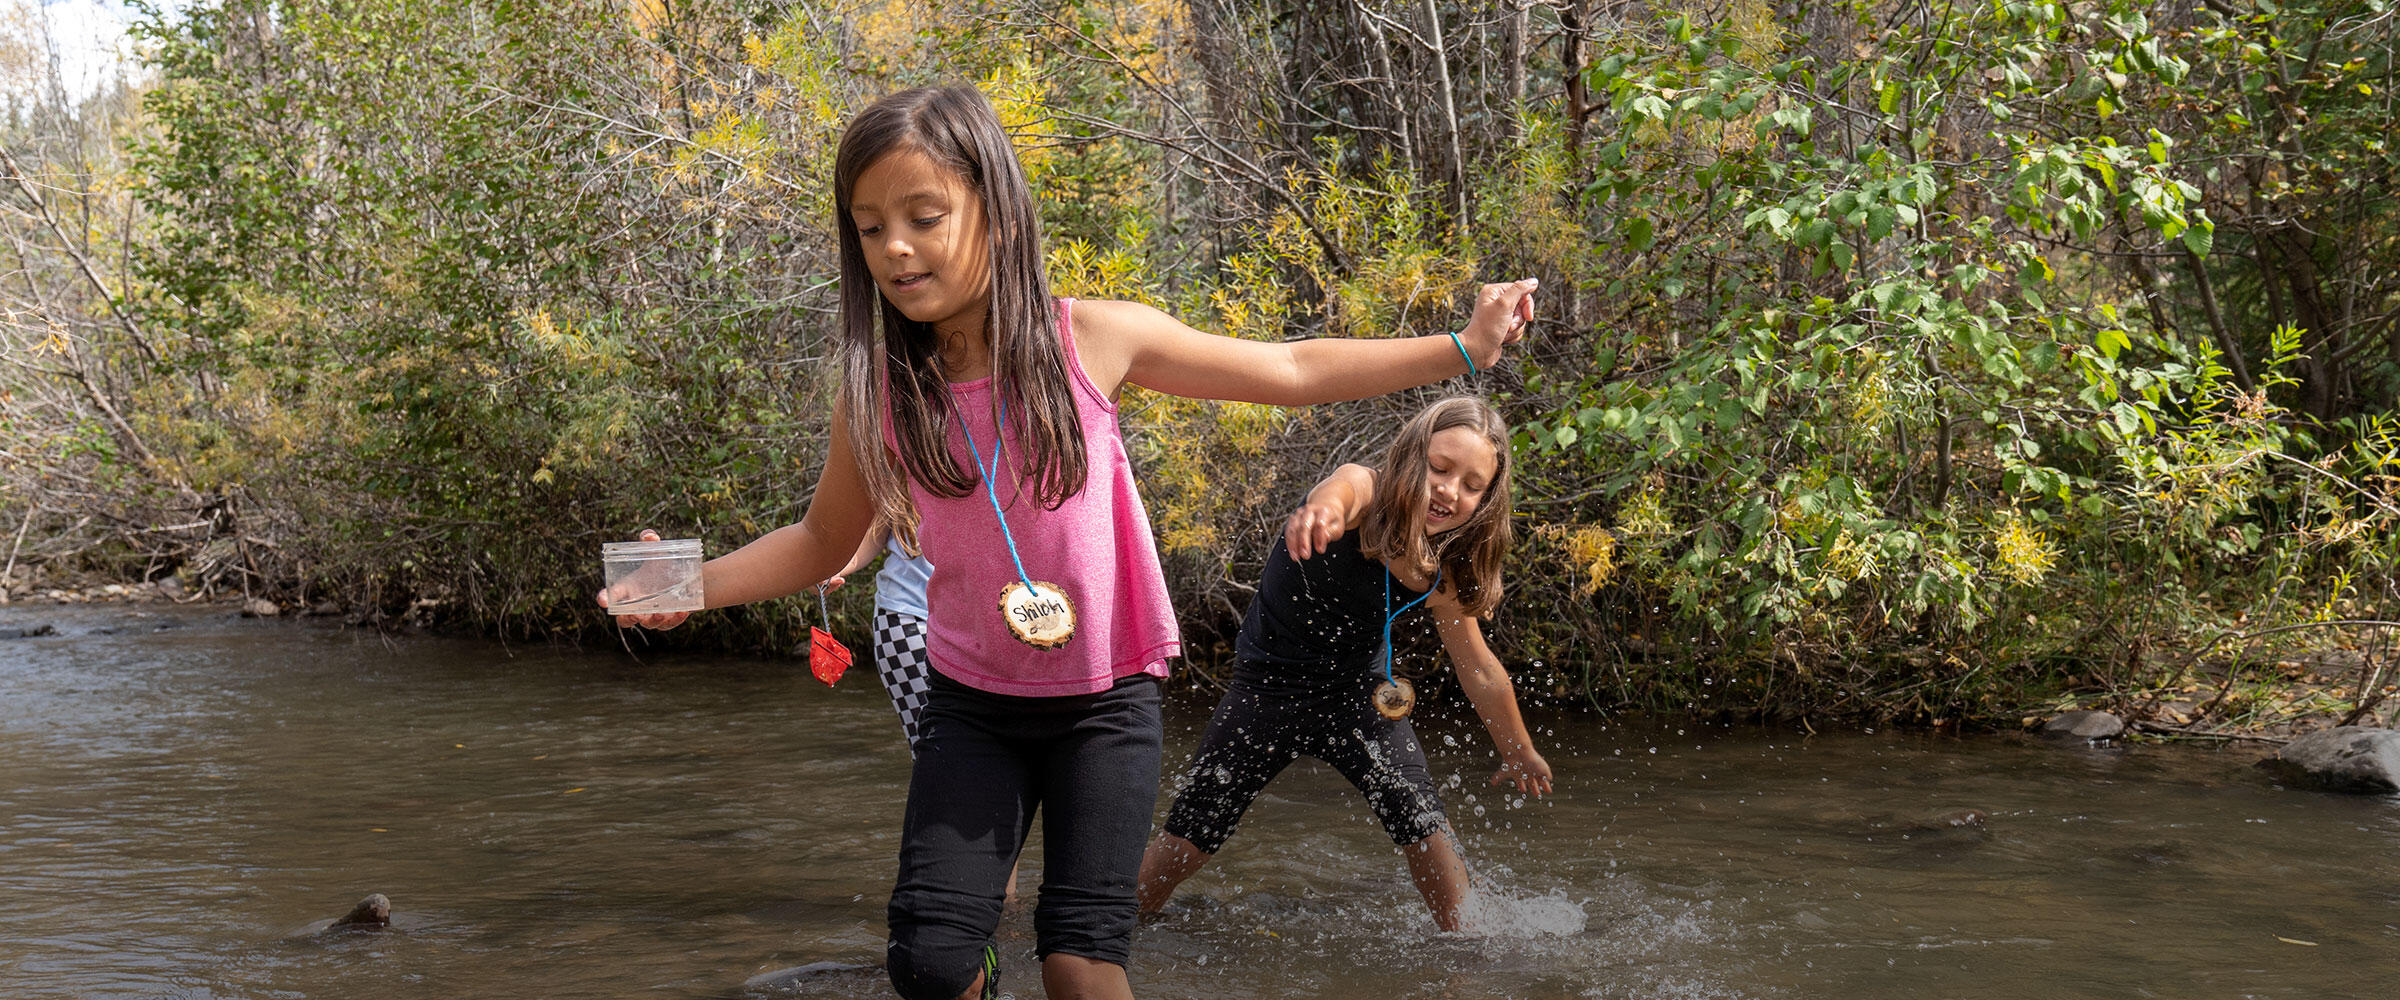 Two girls walk through a stream carrying a jar with an insect.